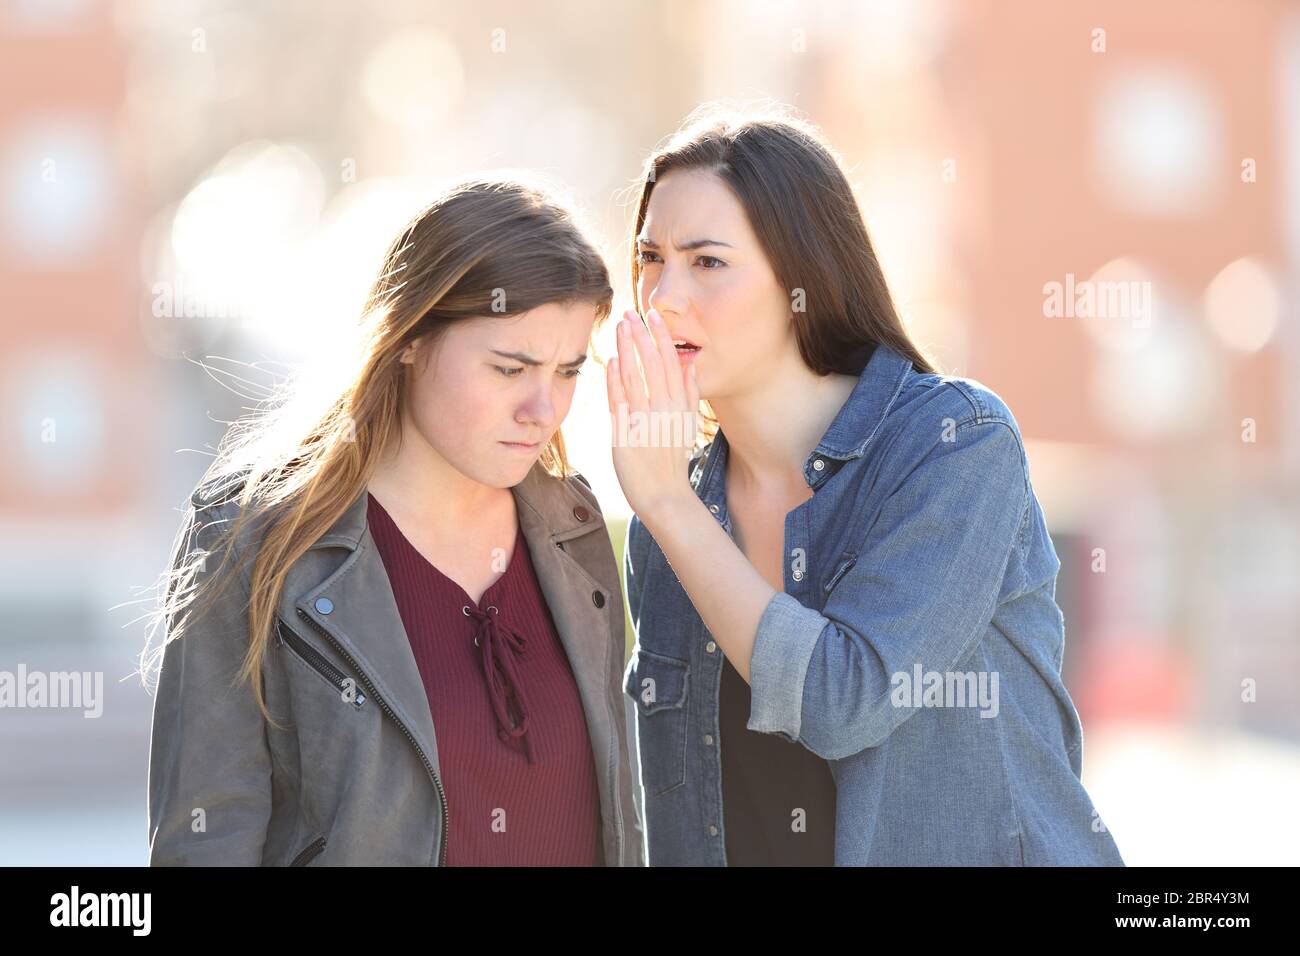 Gossip woman telling secret to her angry friend in the street Stock Photo